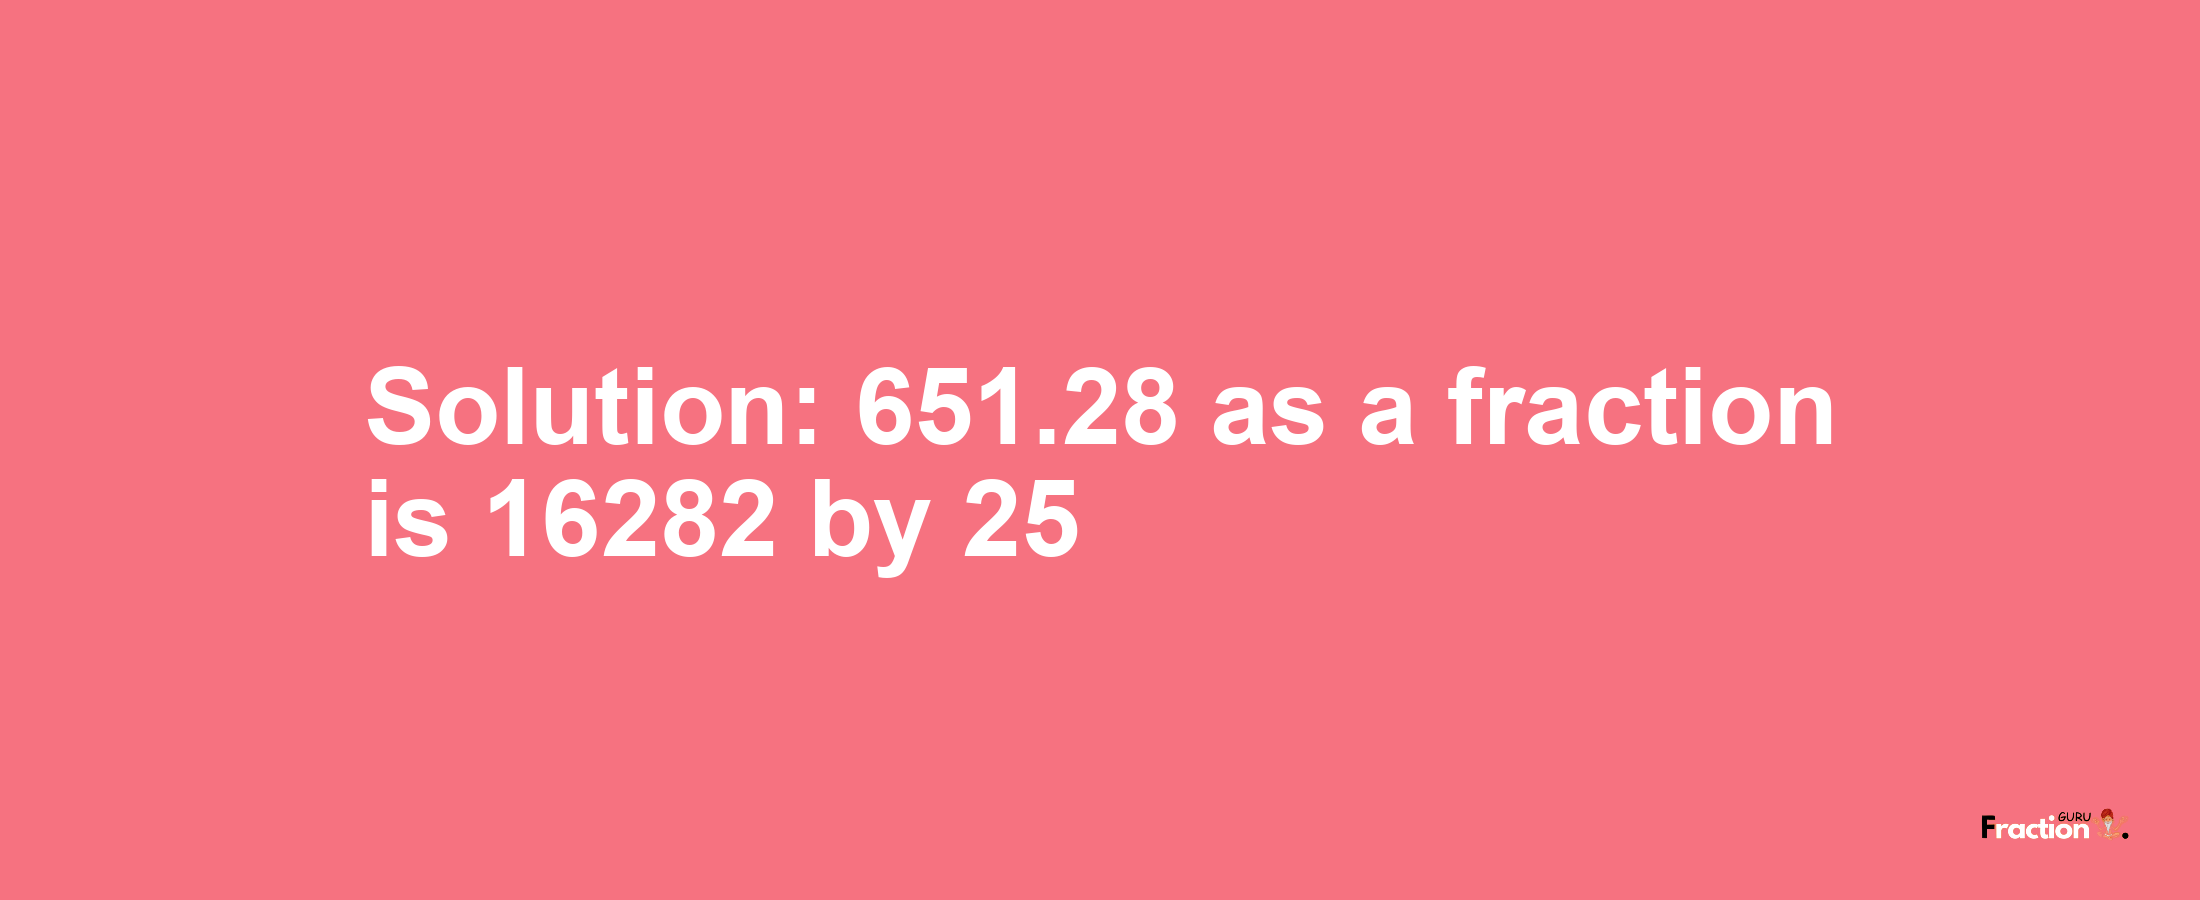 Solution:651.28 as a fraction is 16282/25